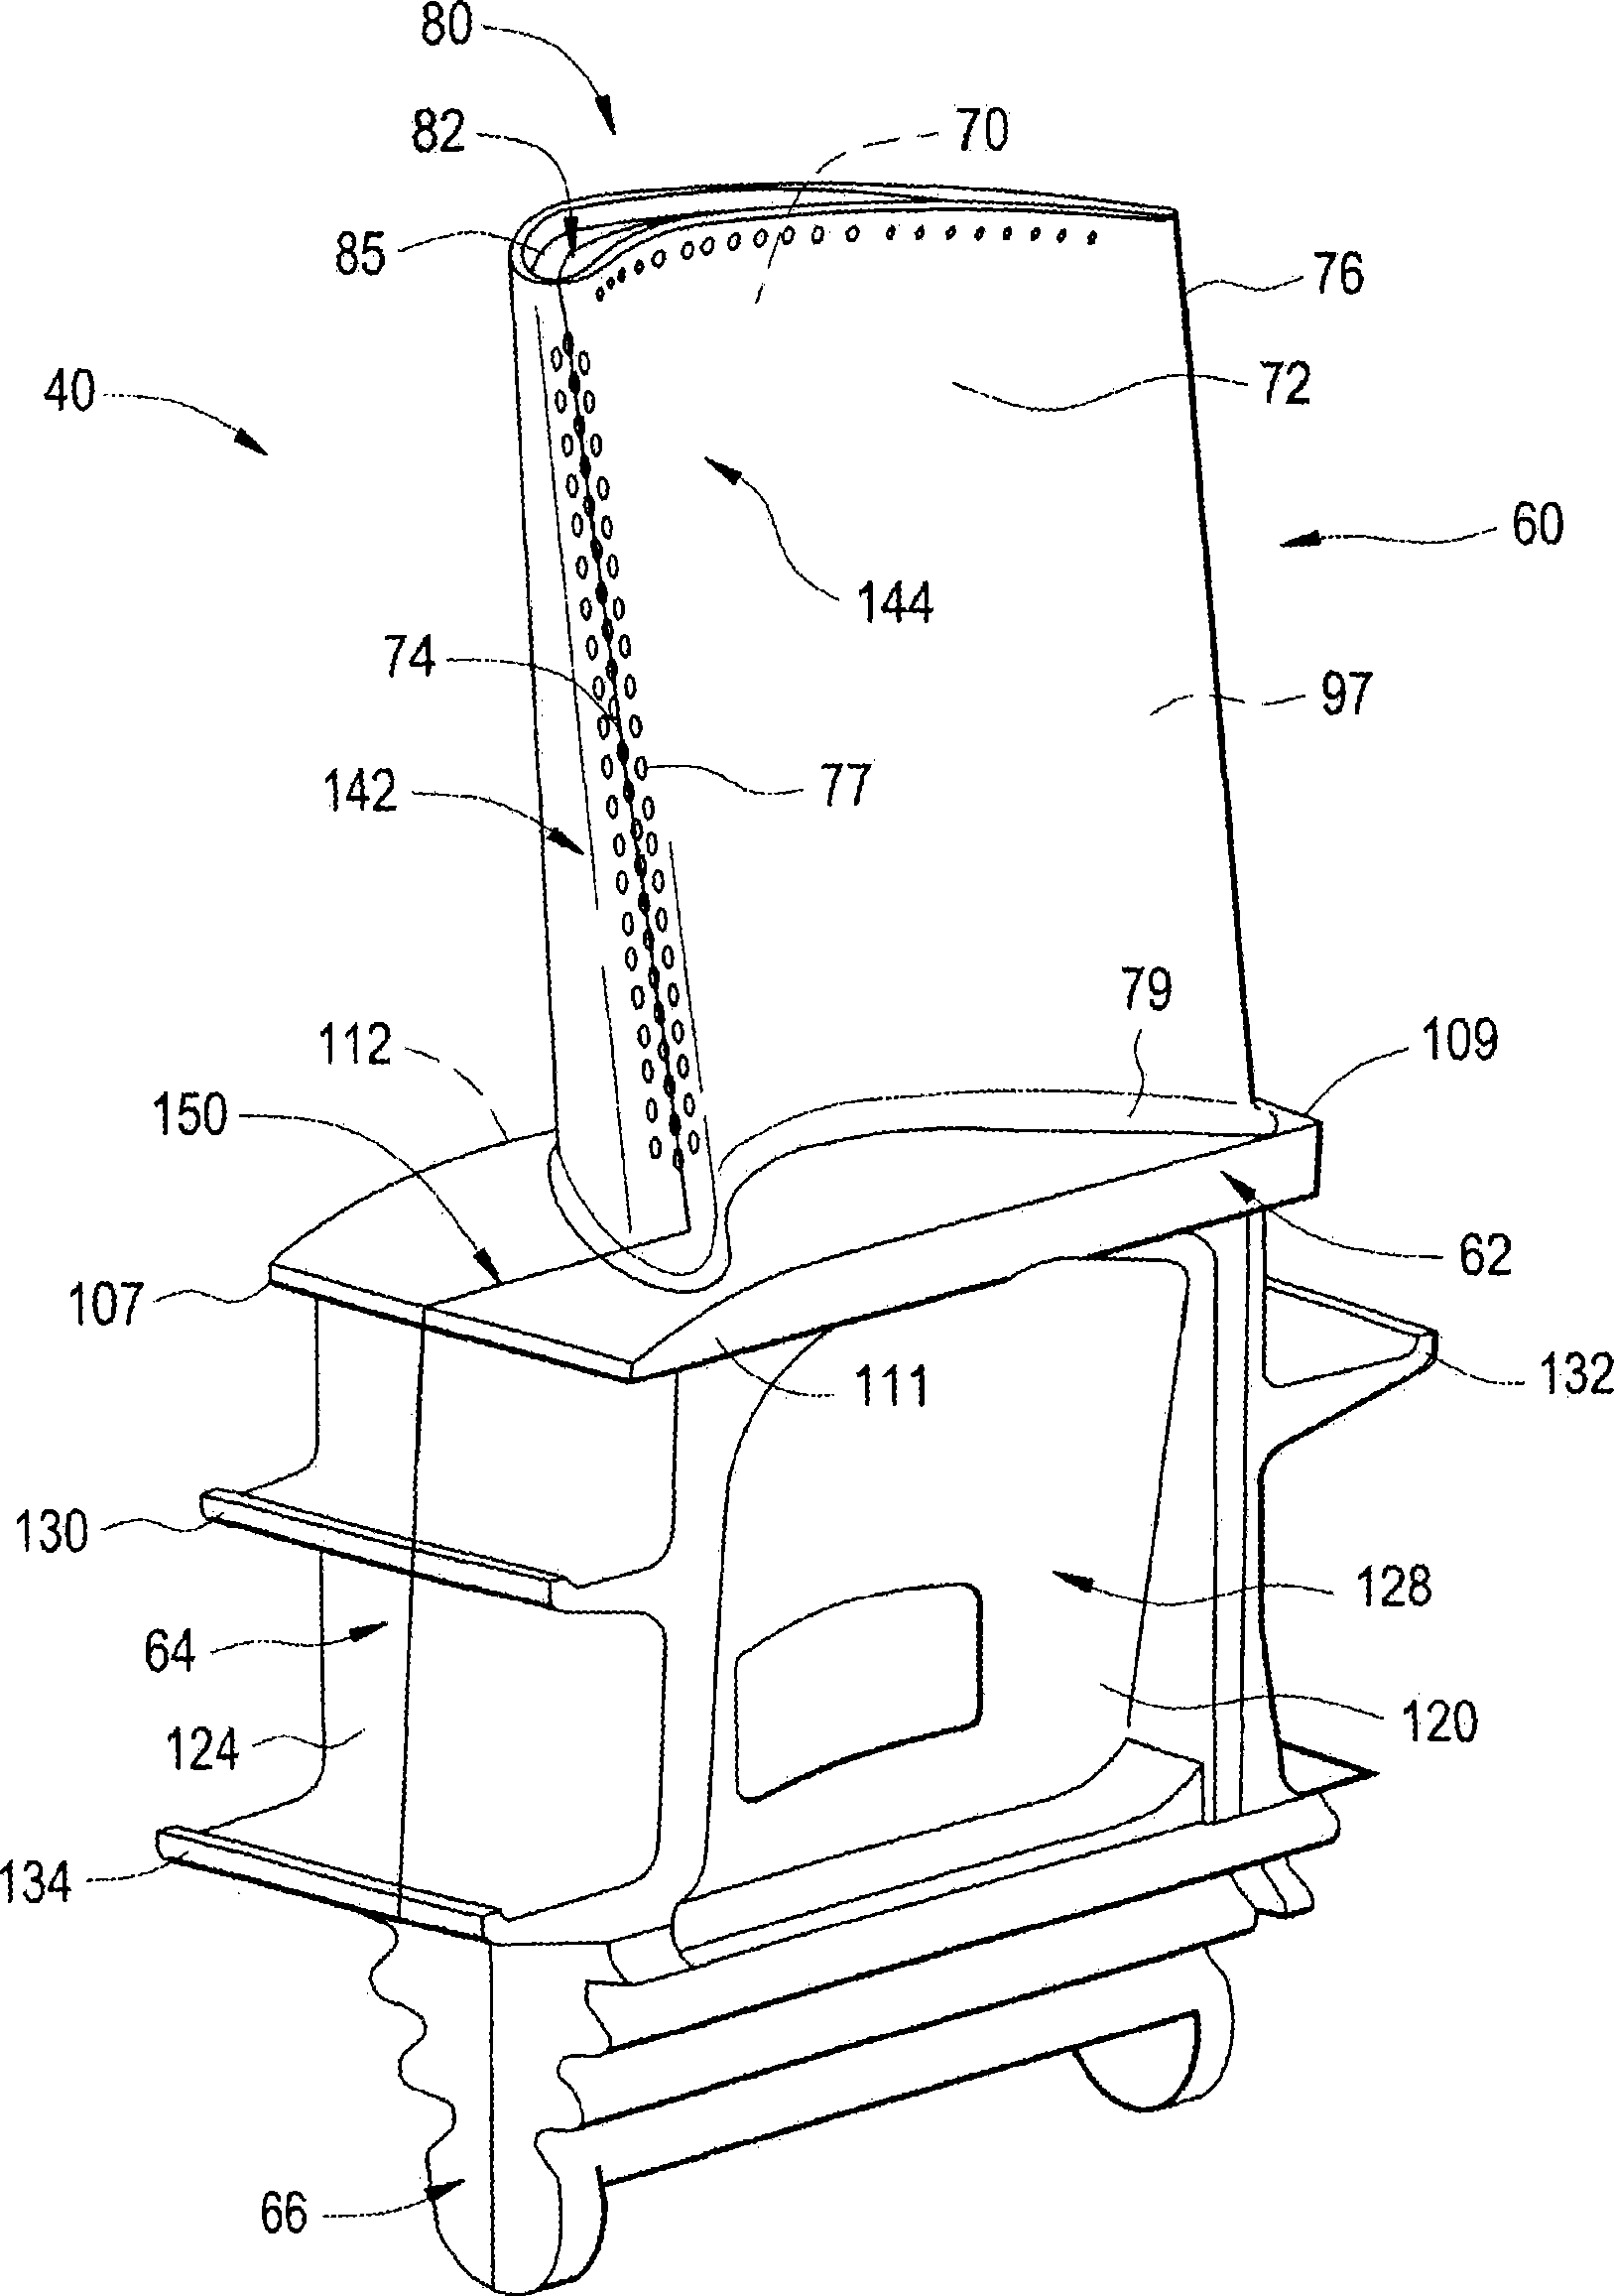 Multi-part cast turbine engine component having an internal cooling channel and method of forming the same